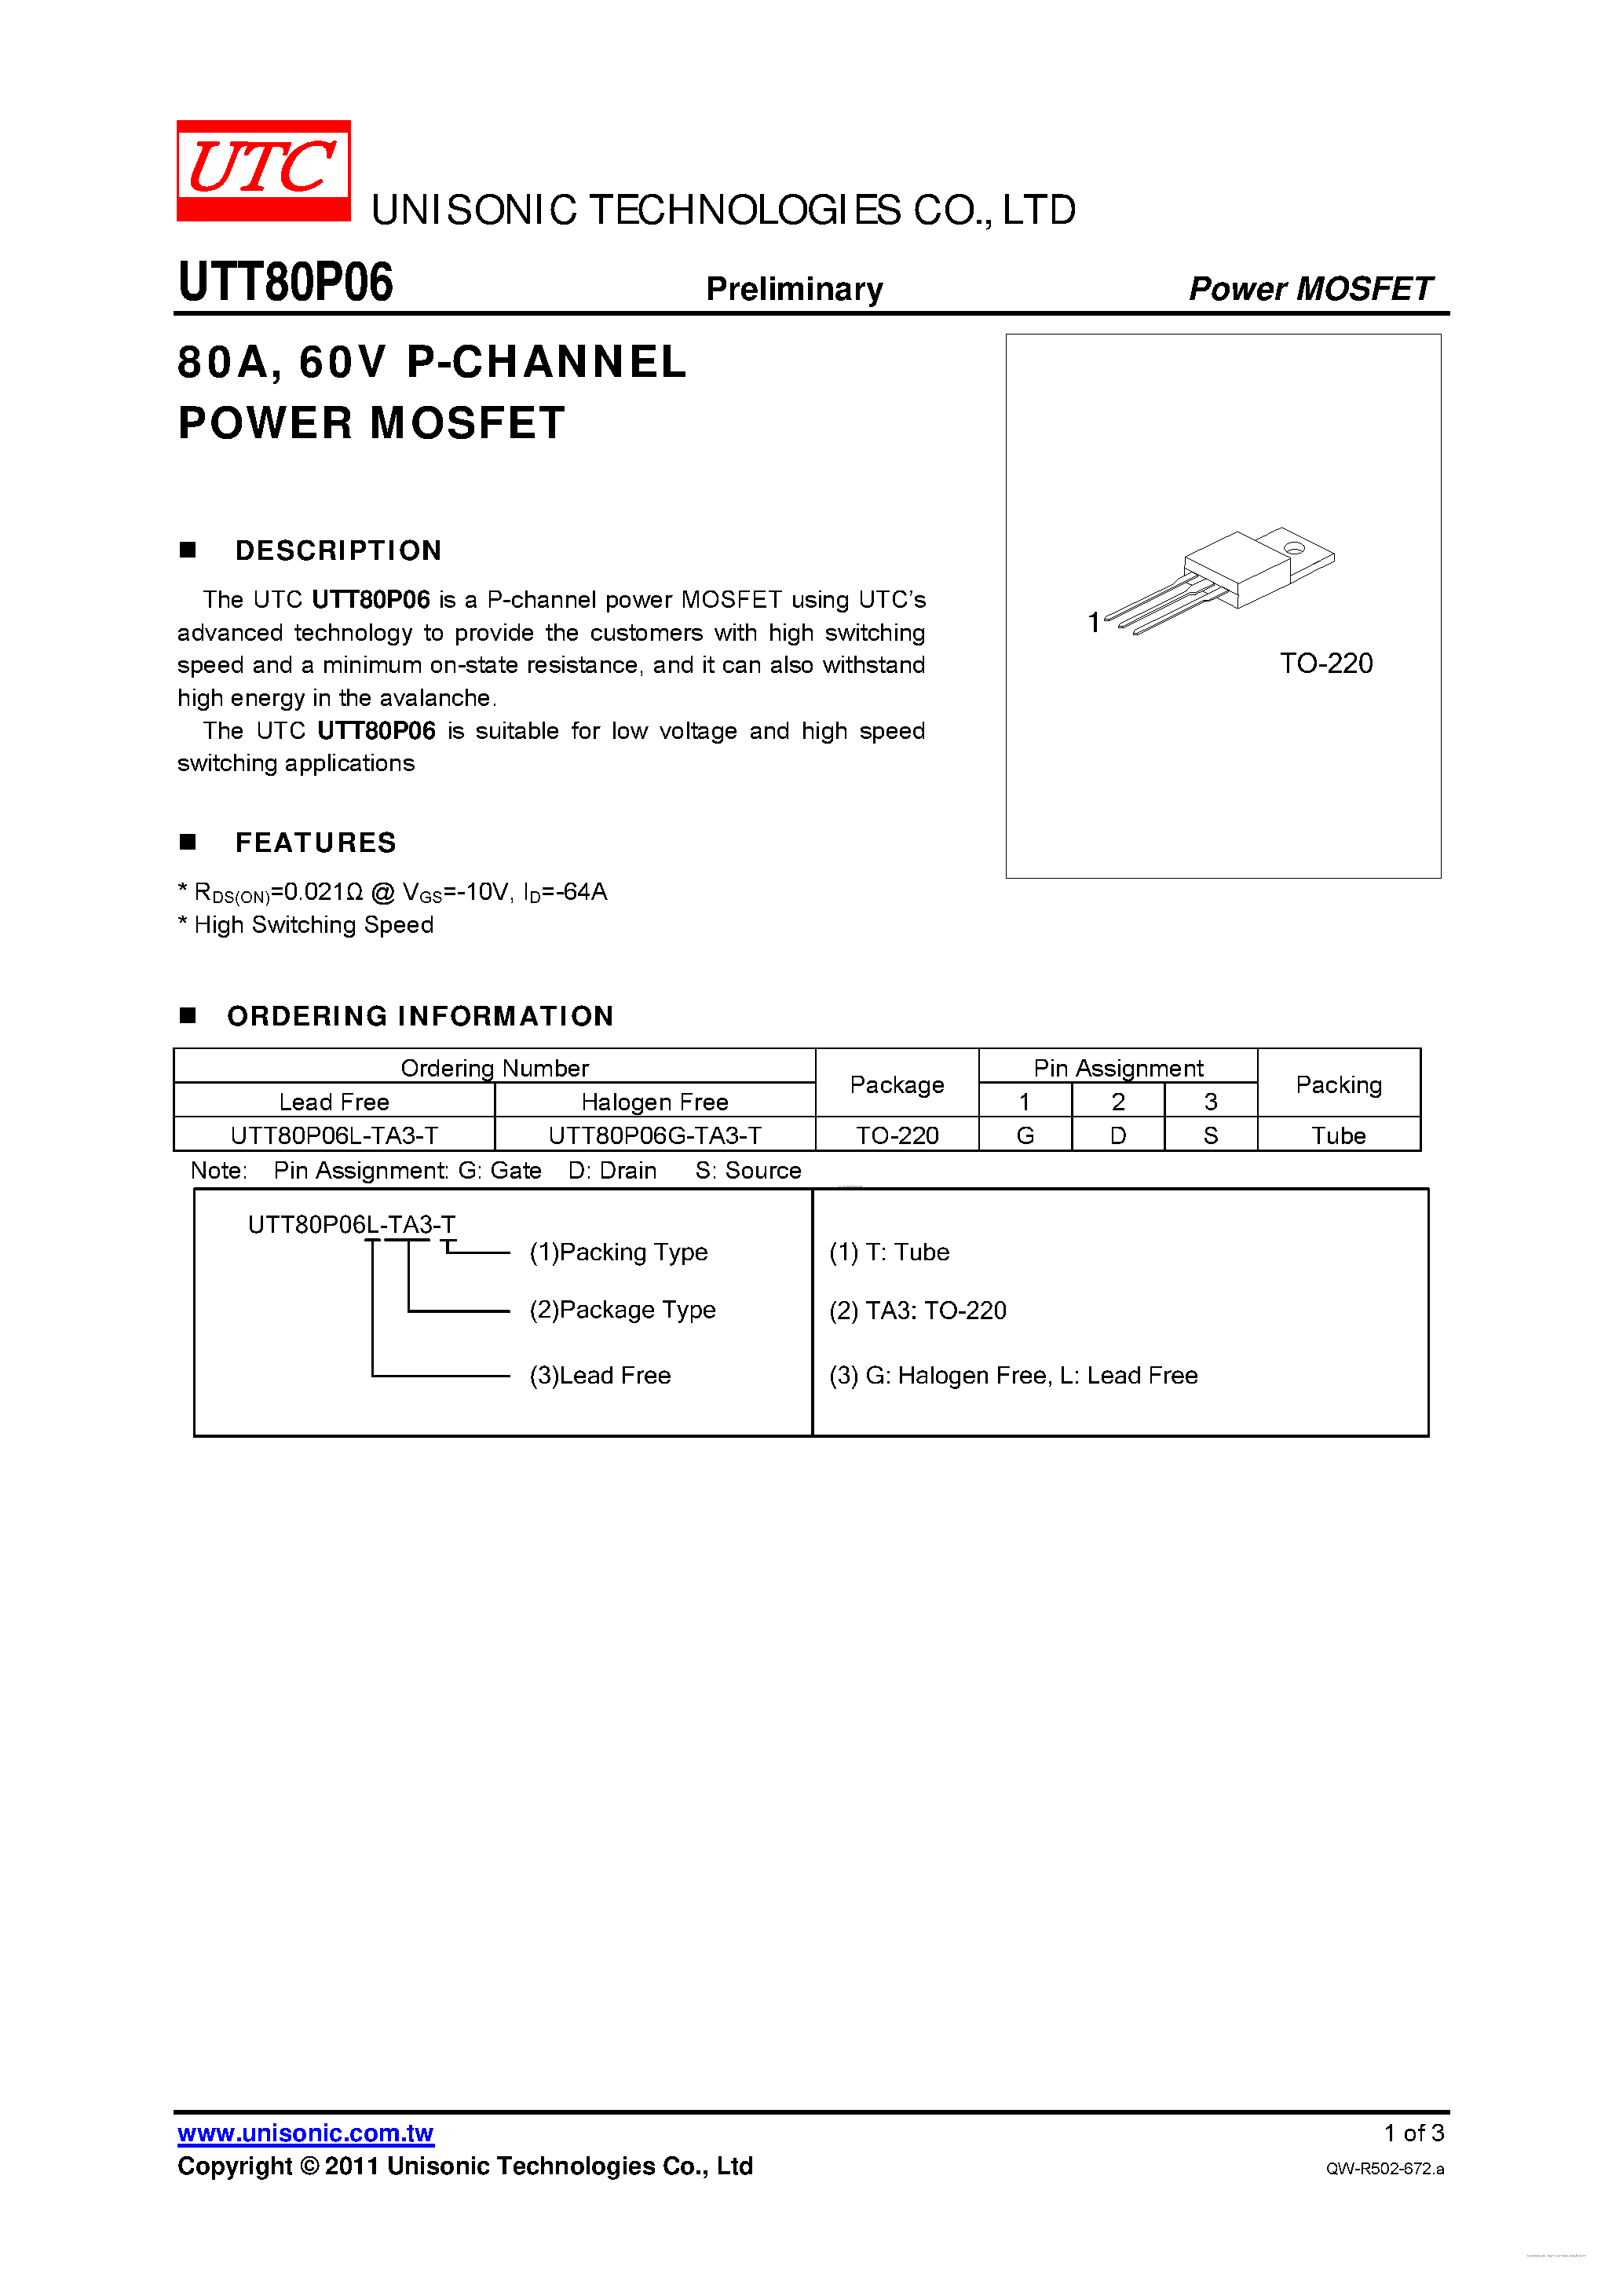 Datasheet UTT80P06 - P-CHANNEL POWER MOSFET page 1